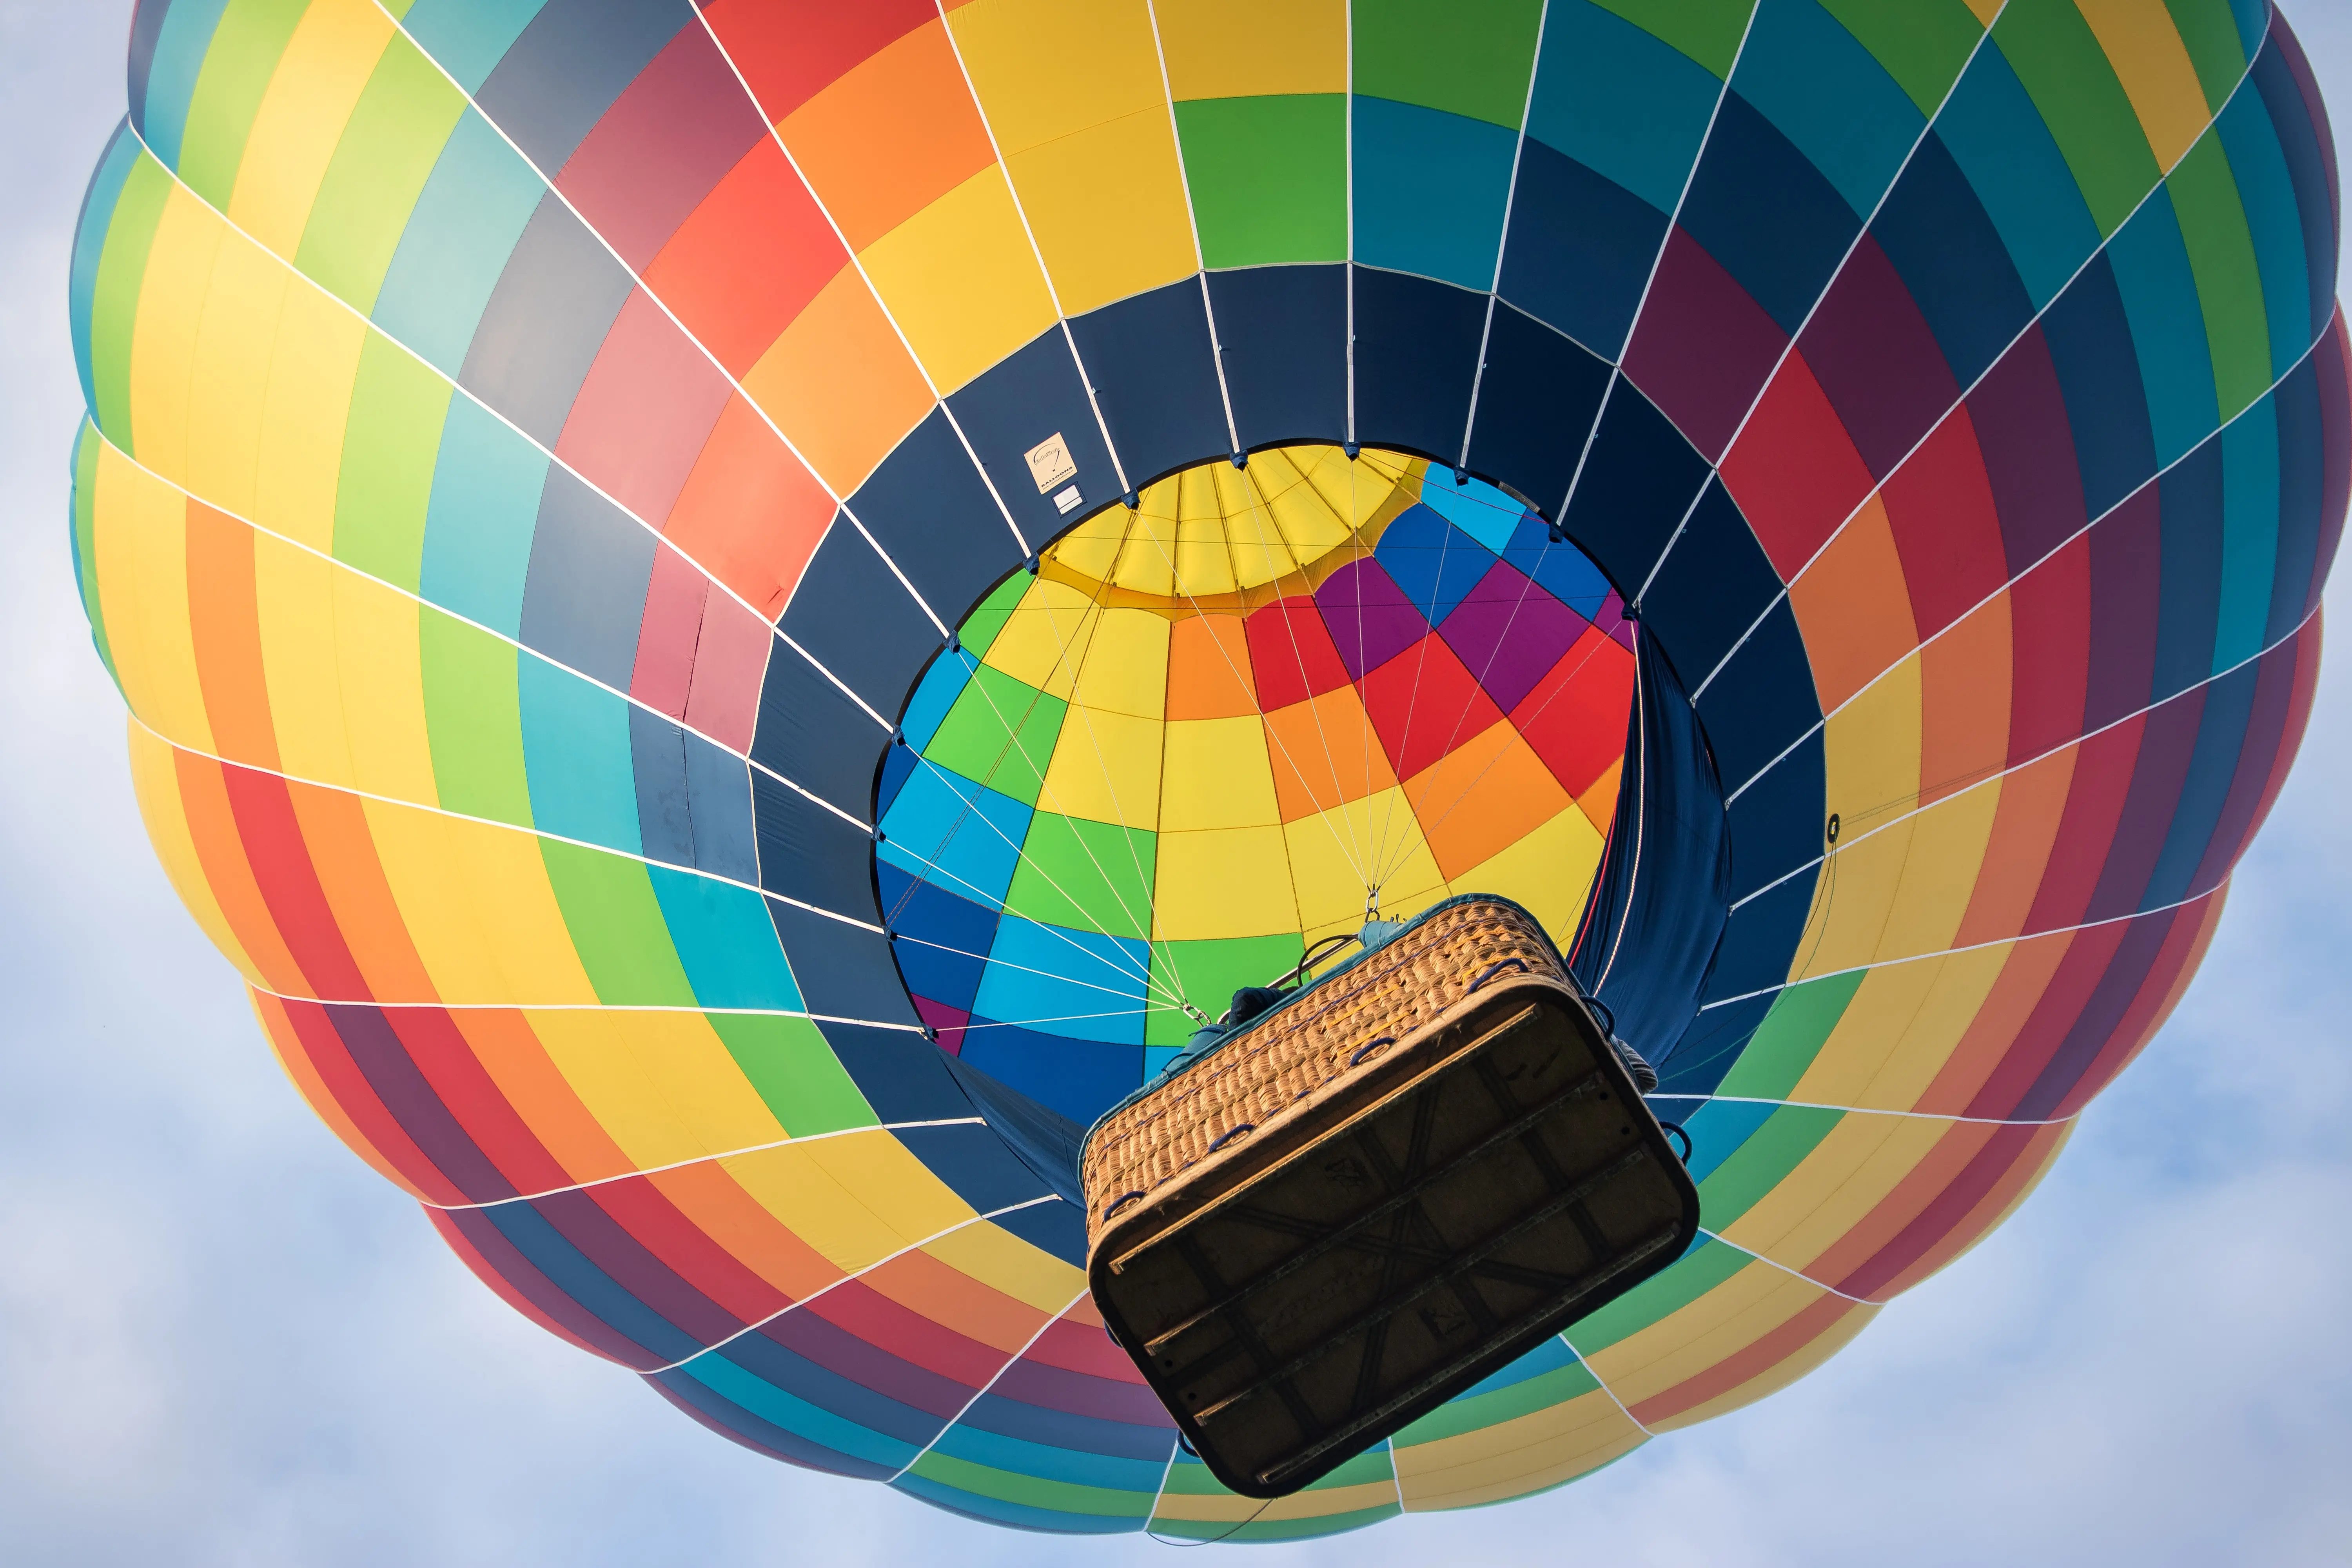 Under view of a very colorful air balloon taking off